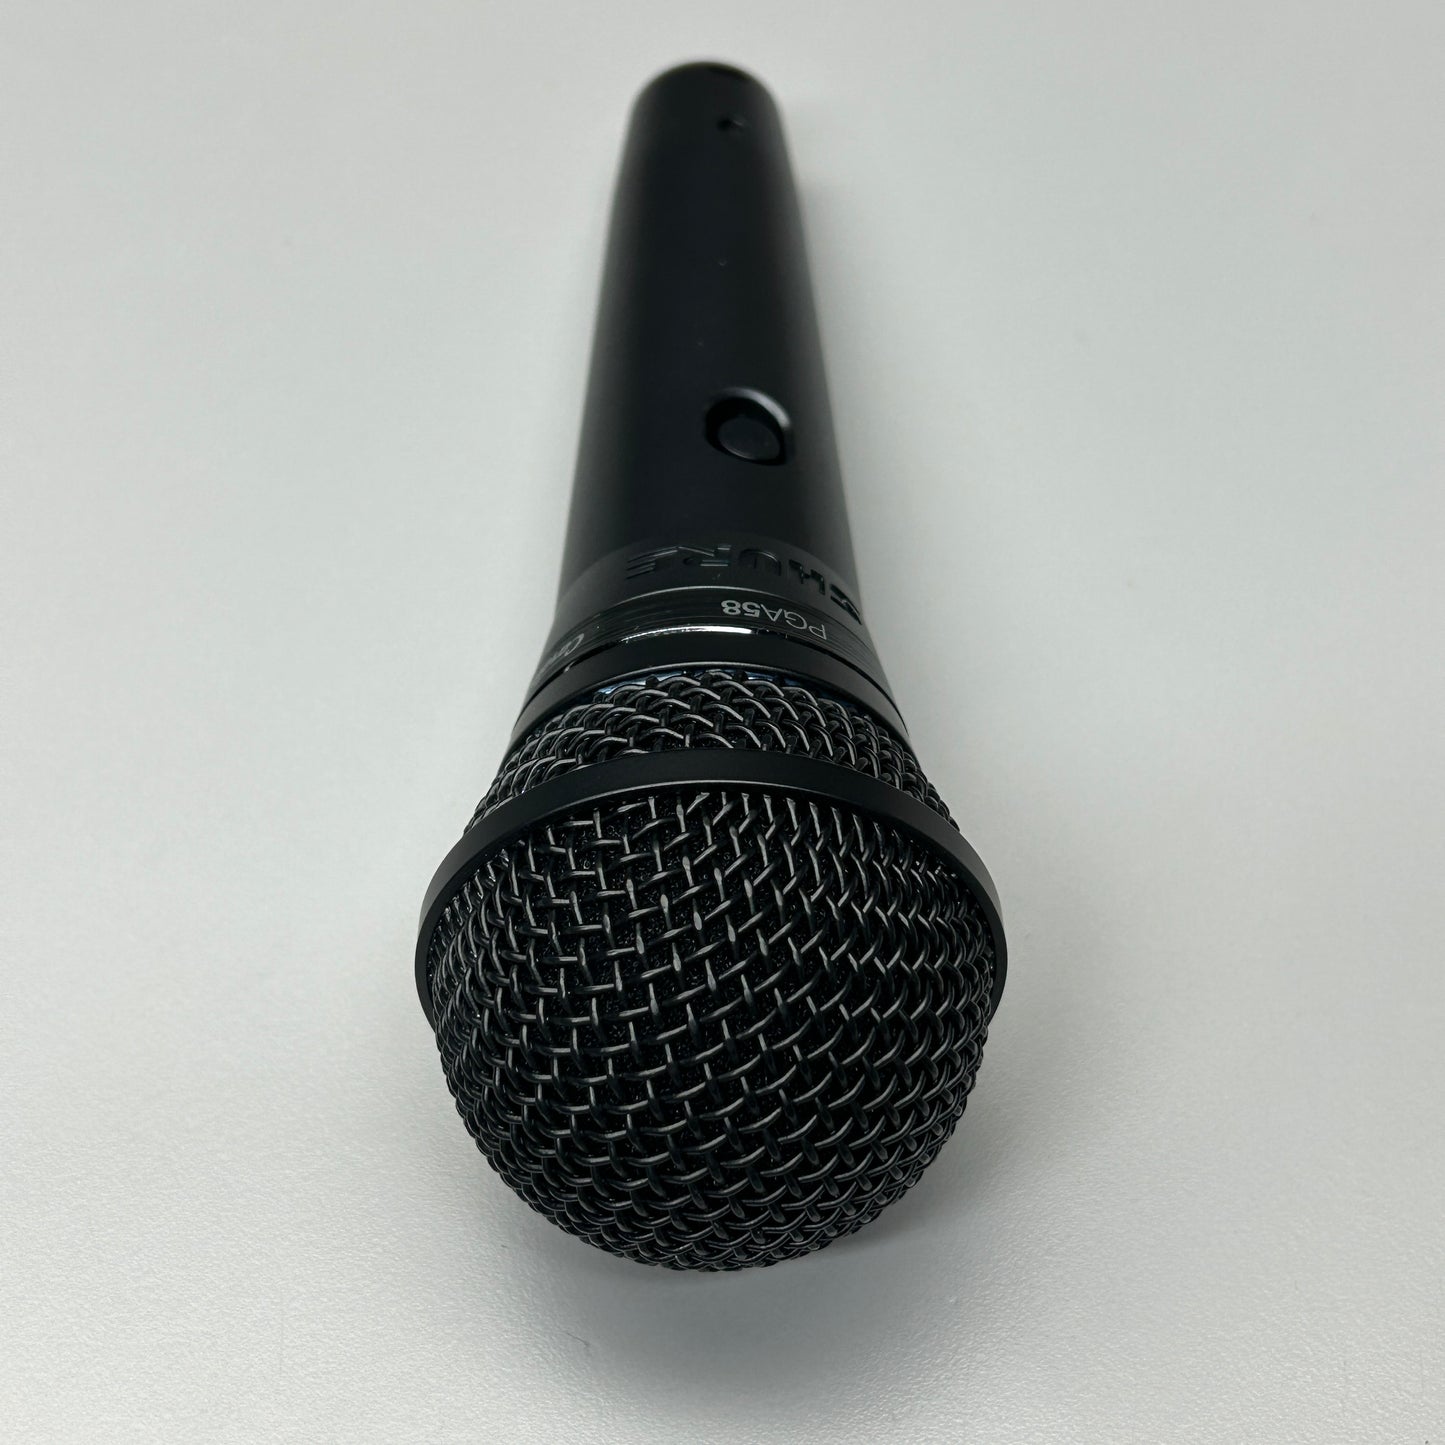 SHURE Vocal Microphone Cardioid Dynamic With 15 ft XLR-QTR Cable (New)